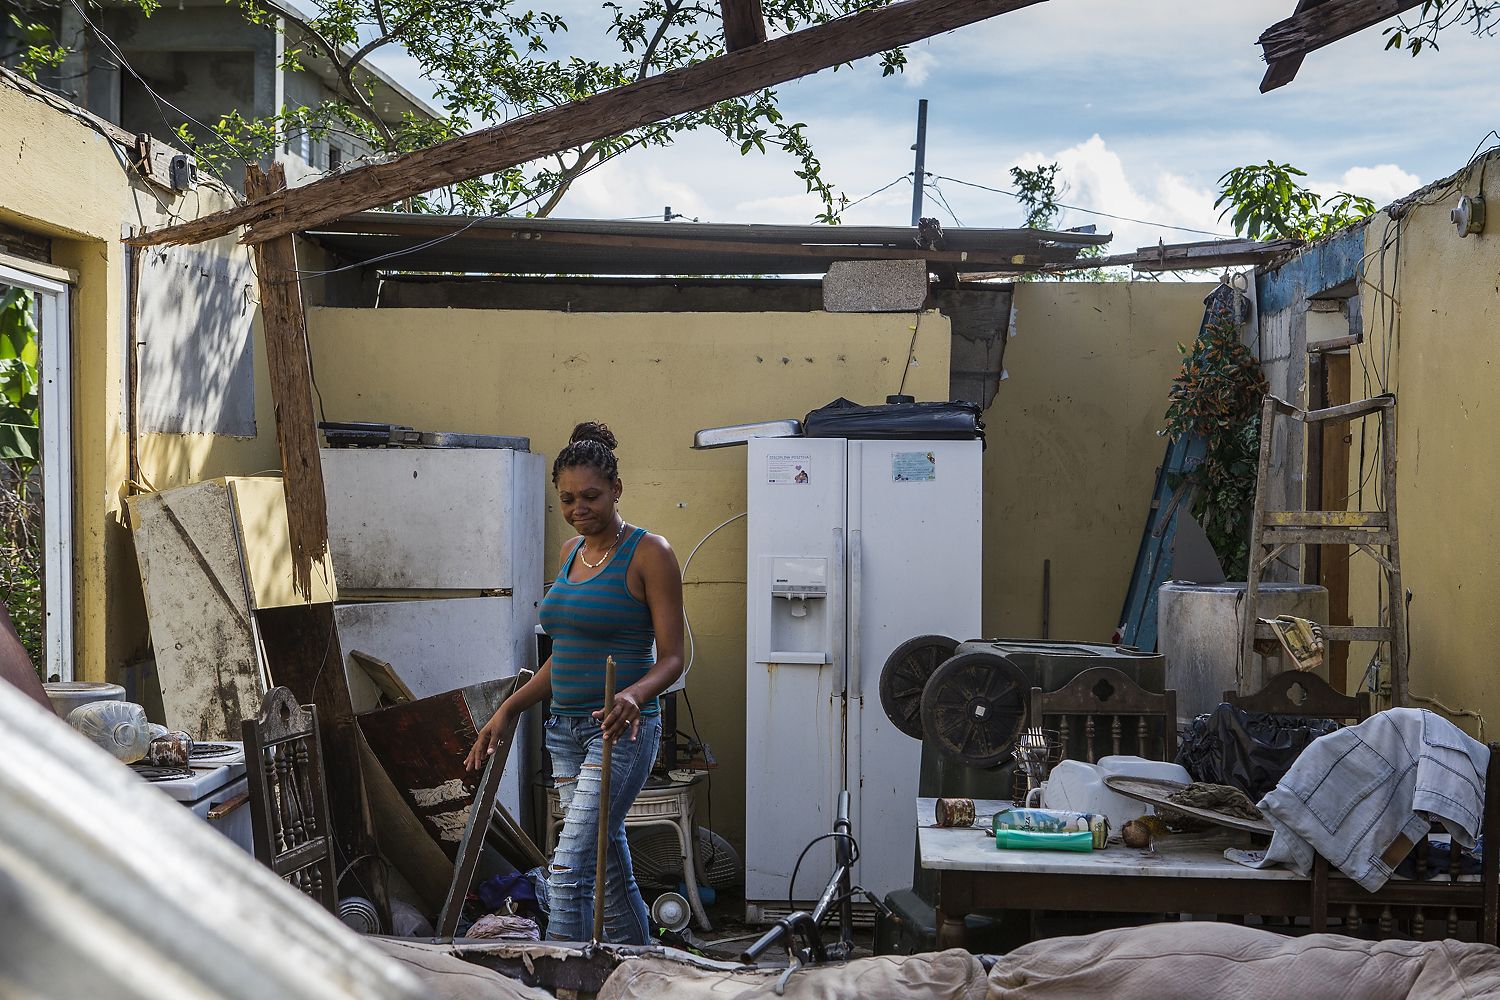 Rosalda Olma, a wife and mother to three kids, sorts through what remains of her home in Loiza. The entire home and contents were destroyed by the hurricane, and the family is living in a nearby school for the time being. “It’s hard getting used to these living conditions,” she said. “All five of us are trying to fit inside a single room.” Image by Ryan Michalesko. Puerto Rico, 2017.